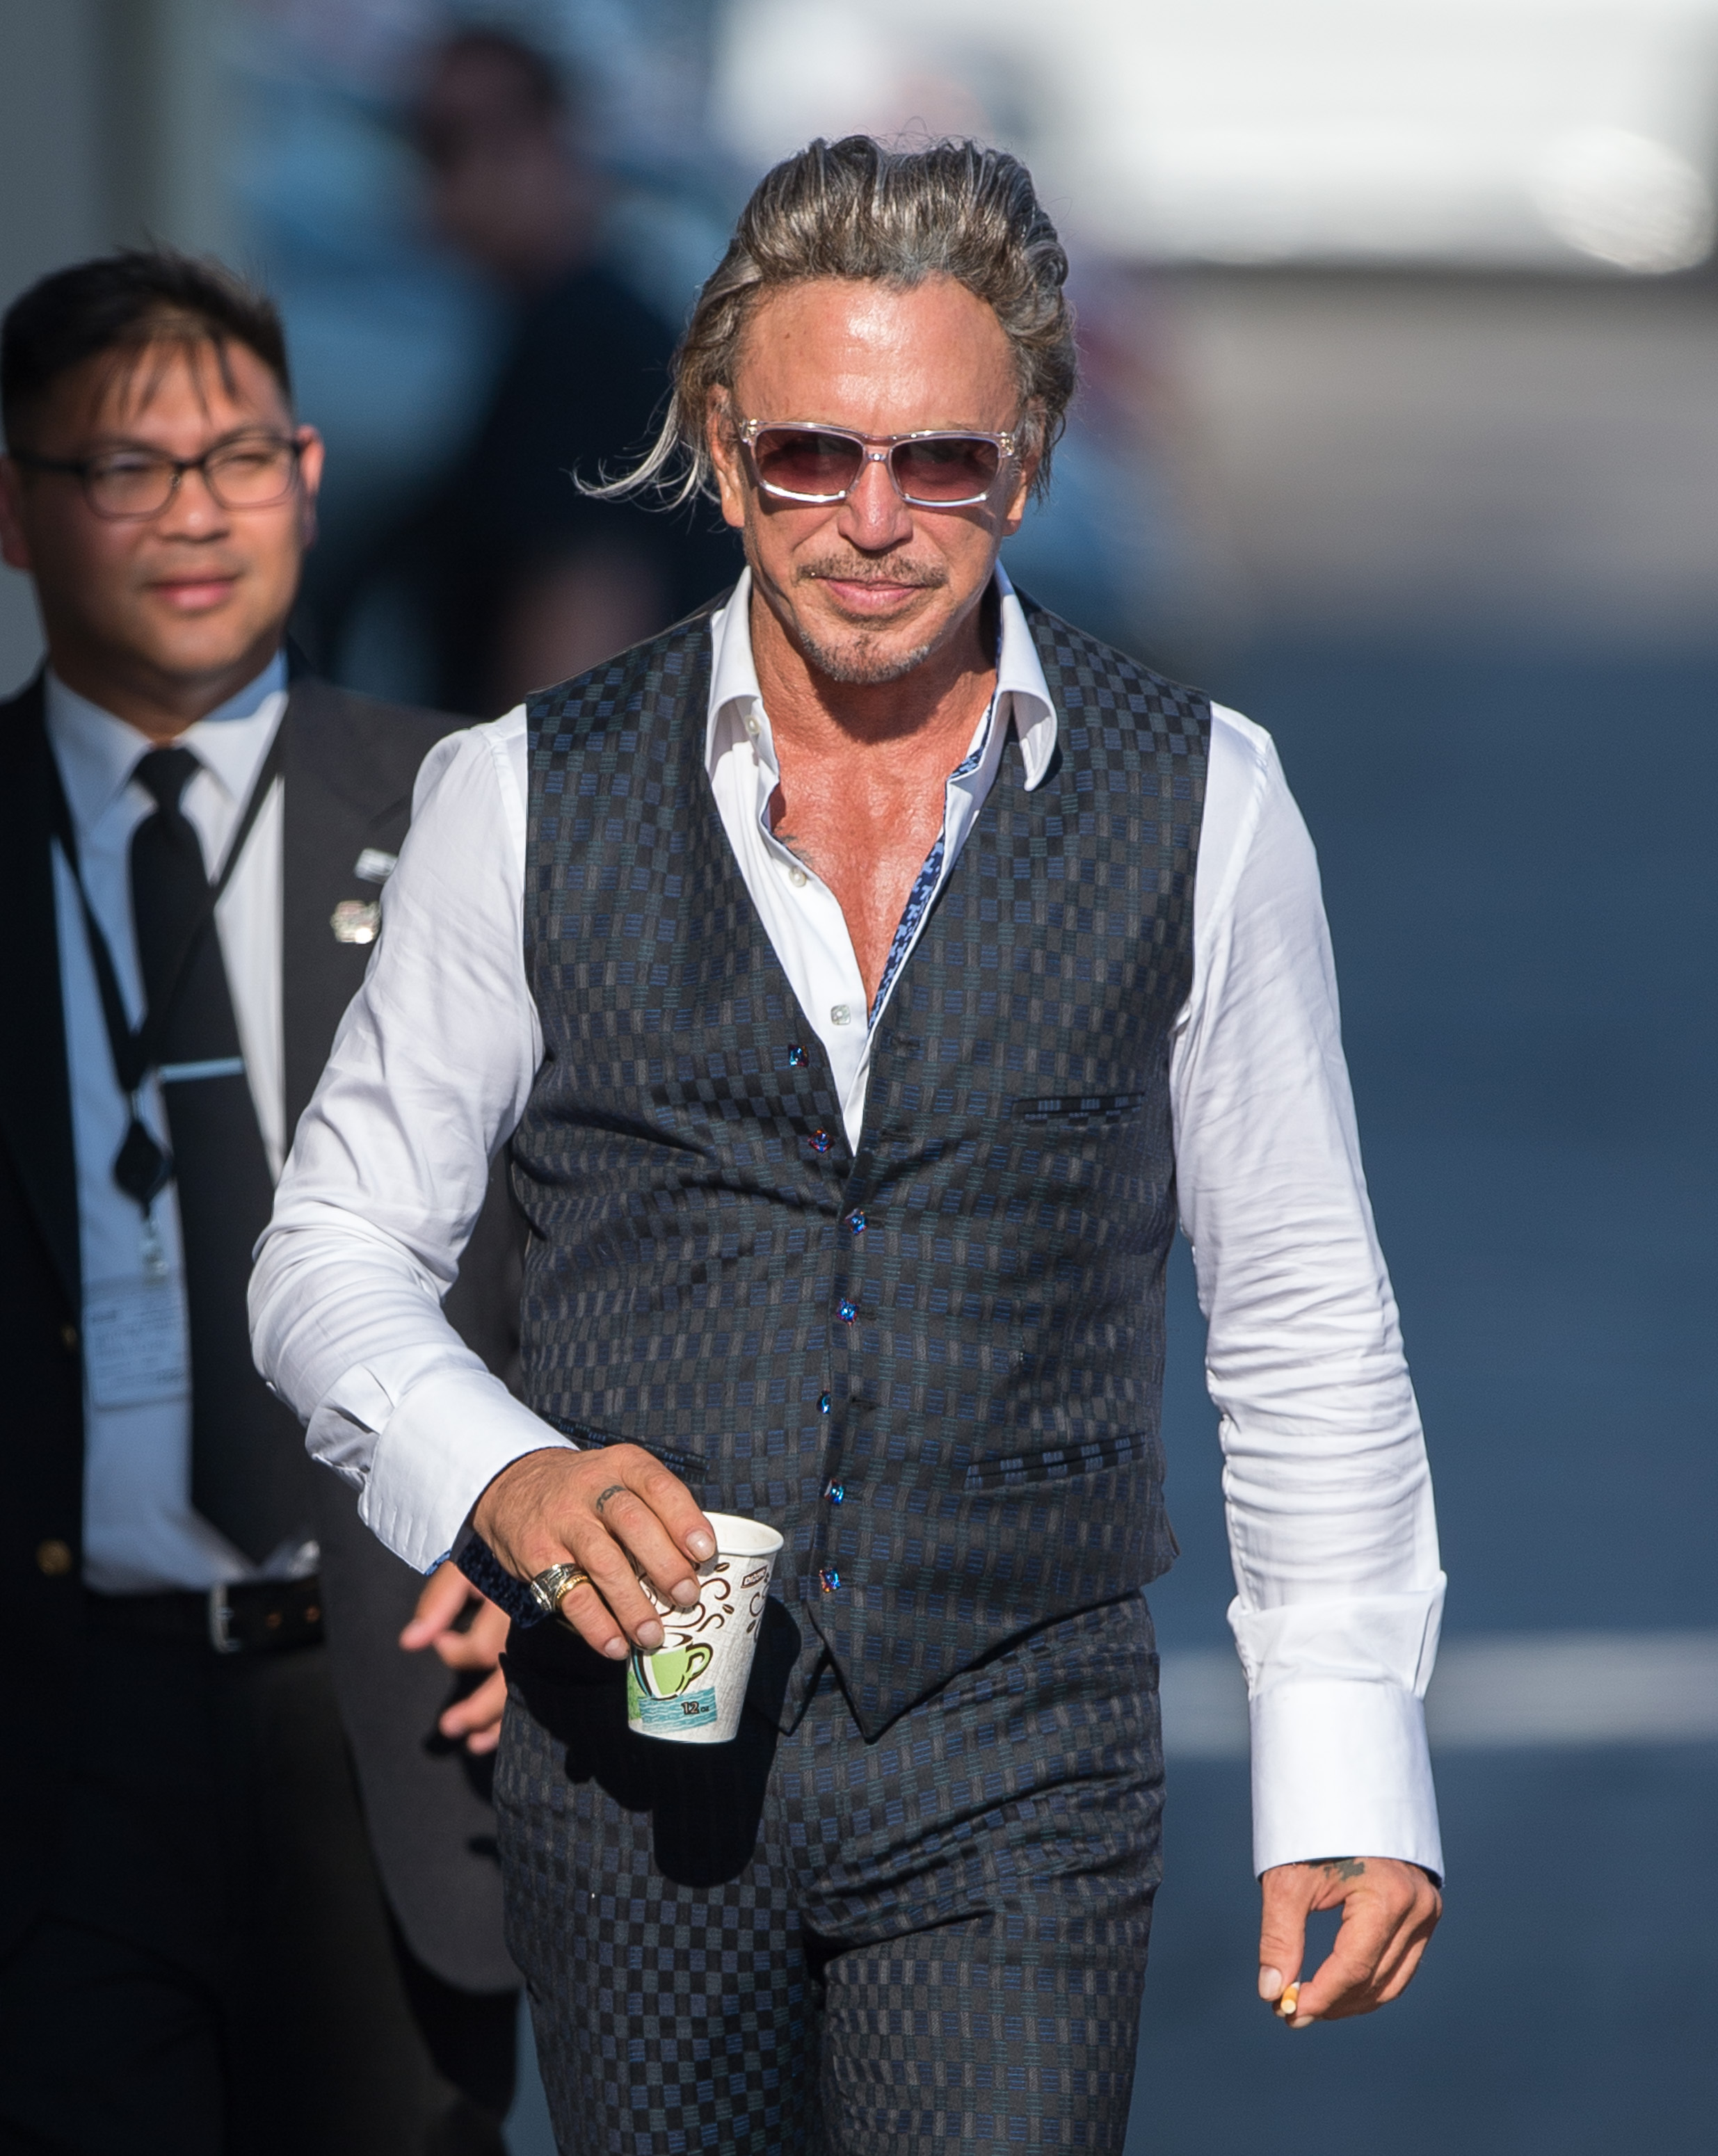 Mickey Rourke at "Jimmy Kimmel Live" on August 7, 2014 in Los Angeles, California. | Source: Getty Images